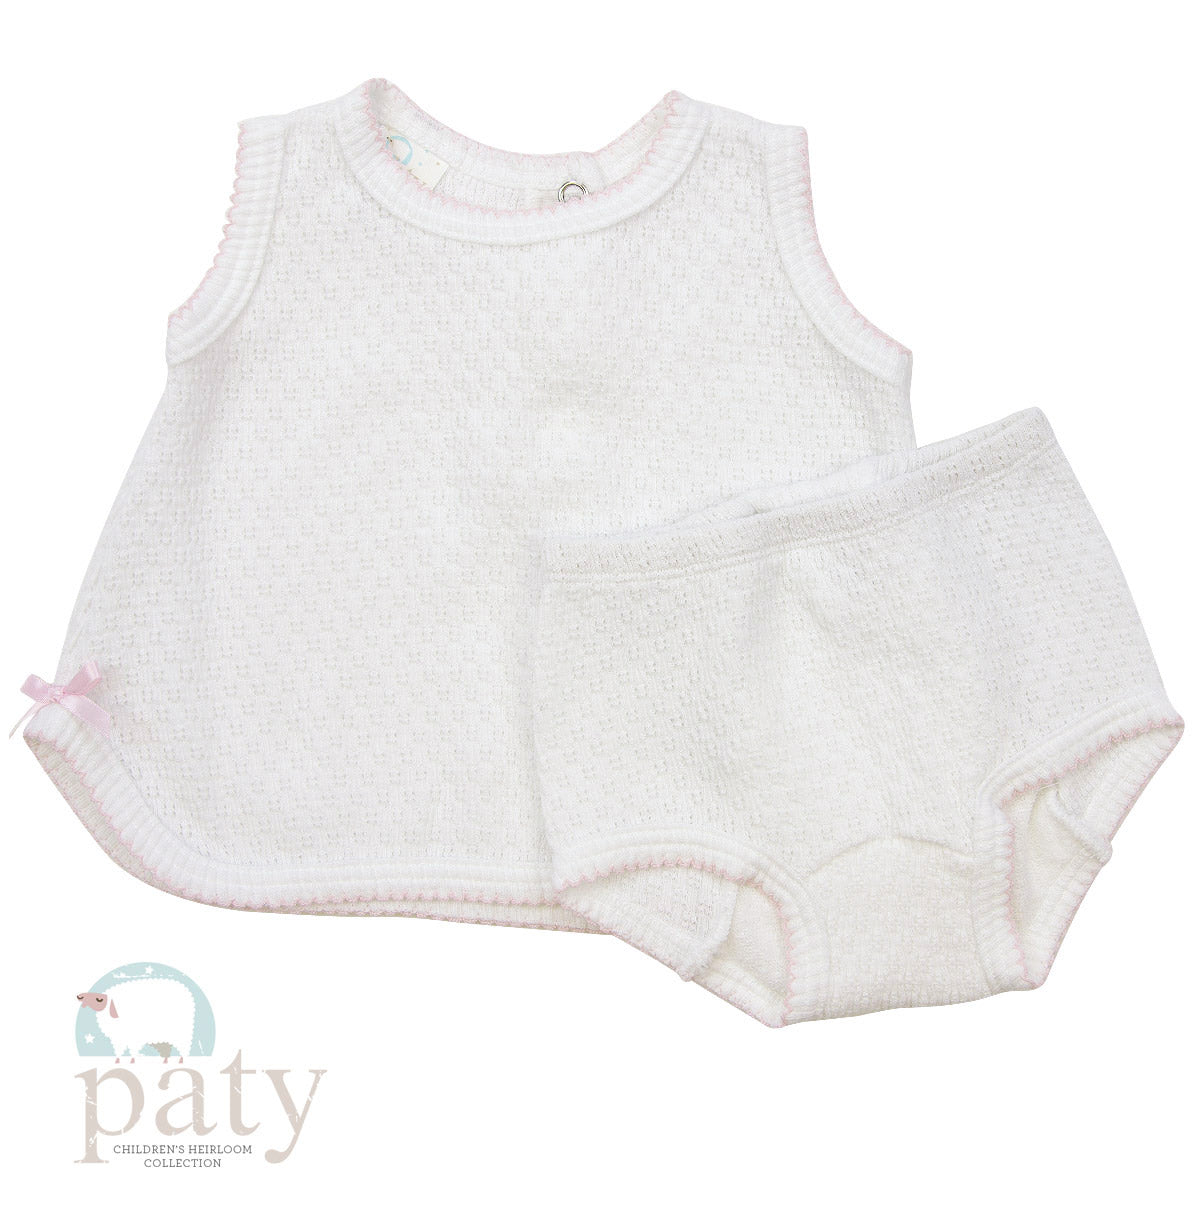 2PC SET, SLEEVELESS TOP W/ DIAPER COVER #136 - NEW!!